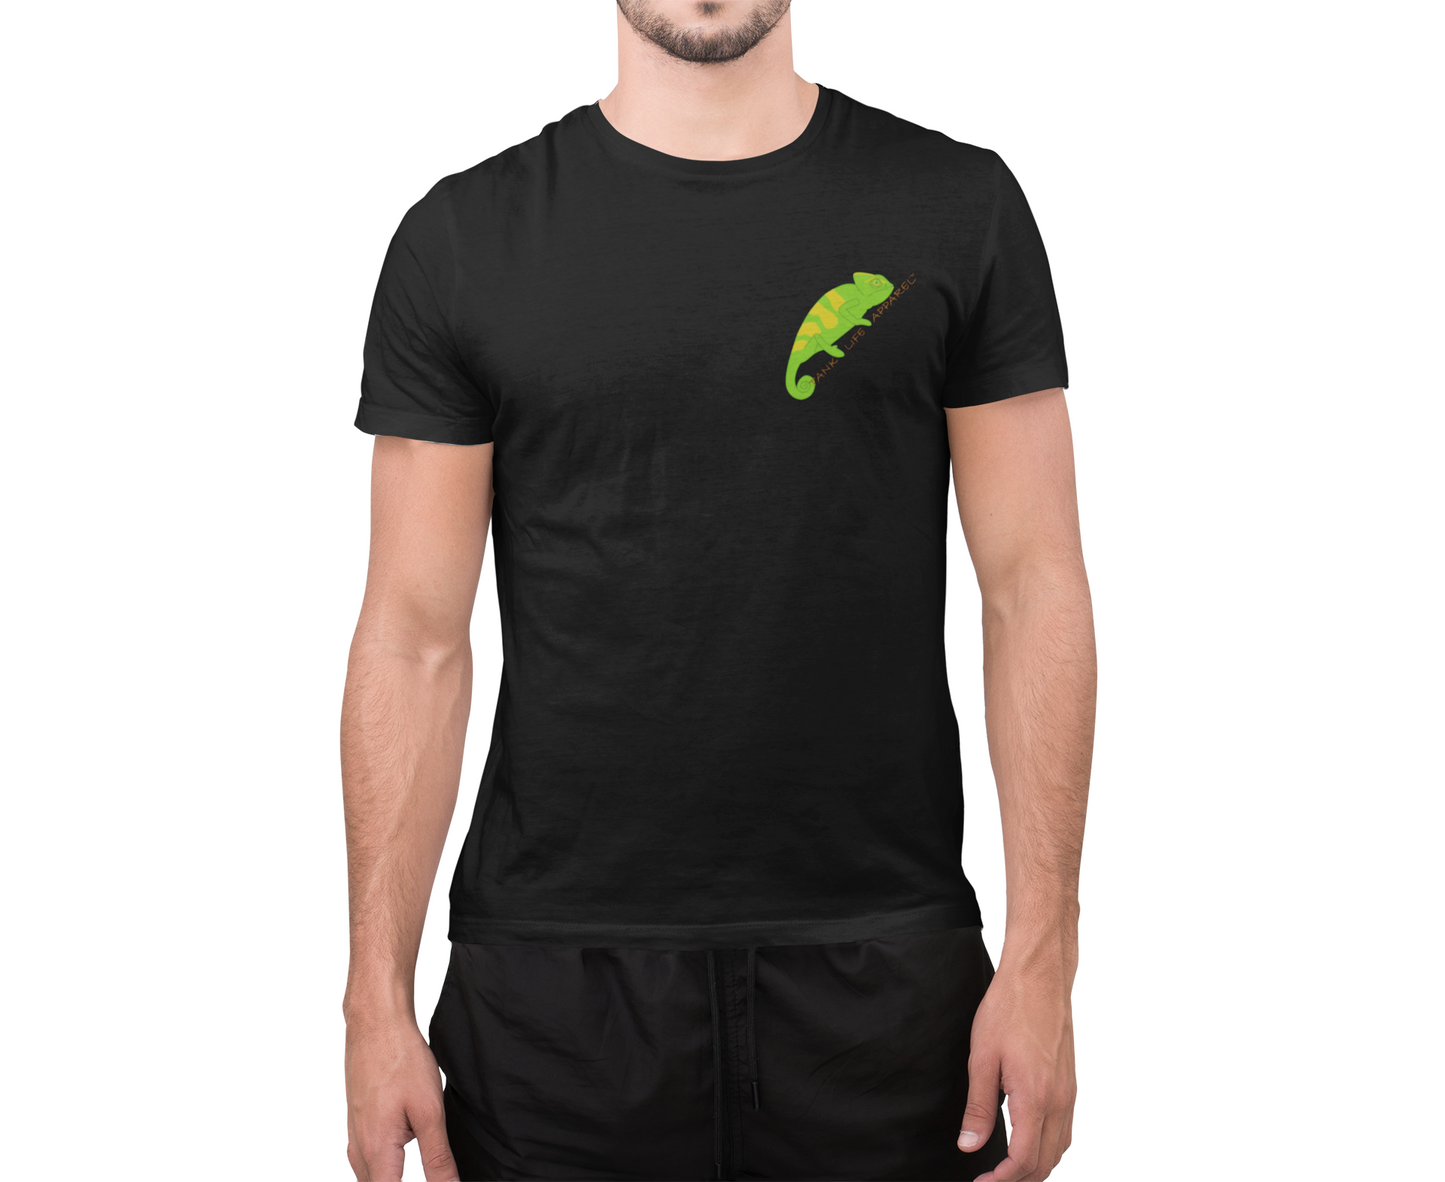 The Tank Life Apparel veiled chameleon design on a classic tee with our custom TLA sleeve label. Green Chameleon pet shirt.